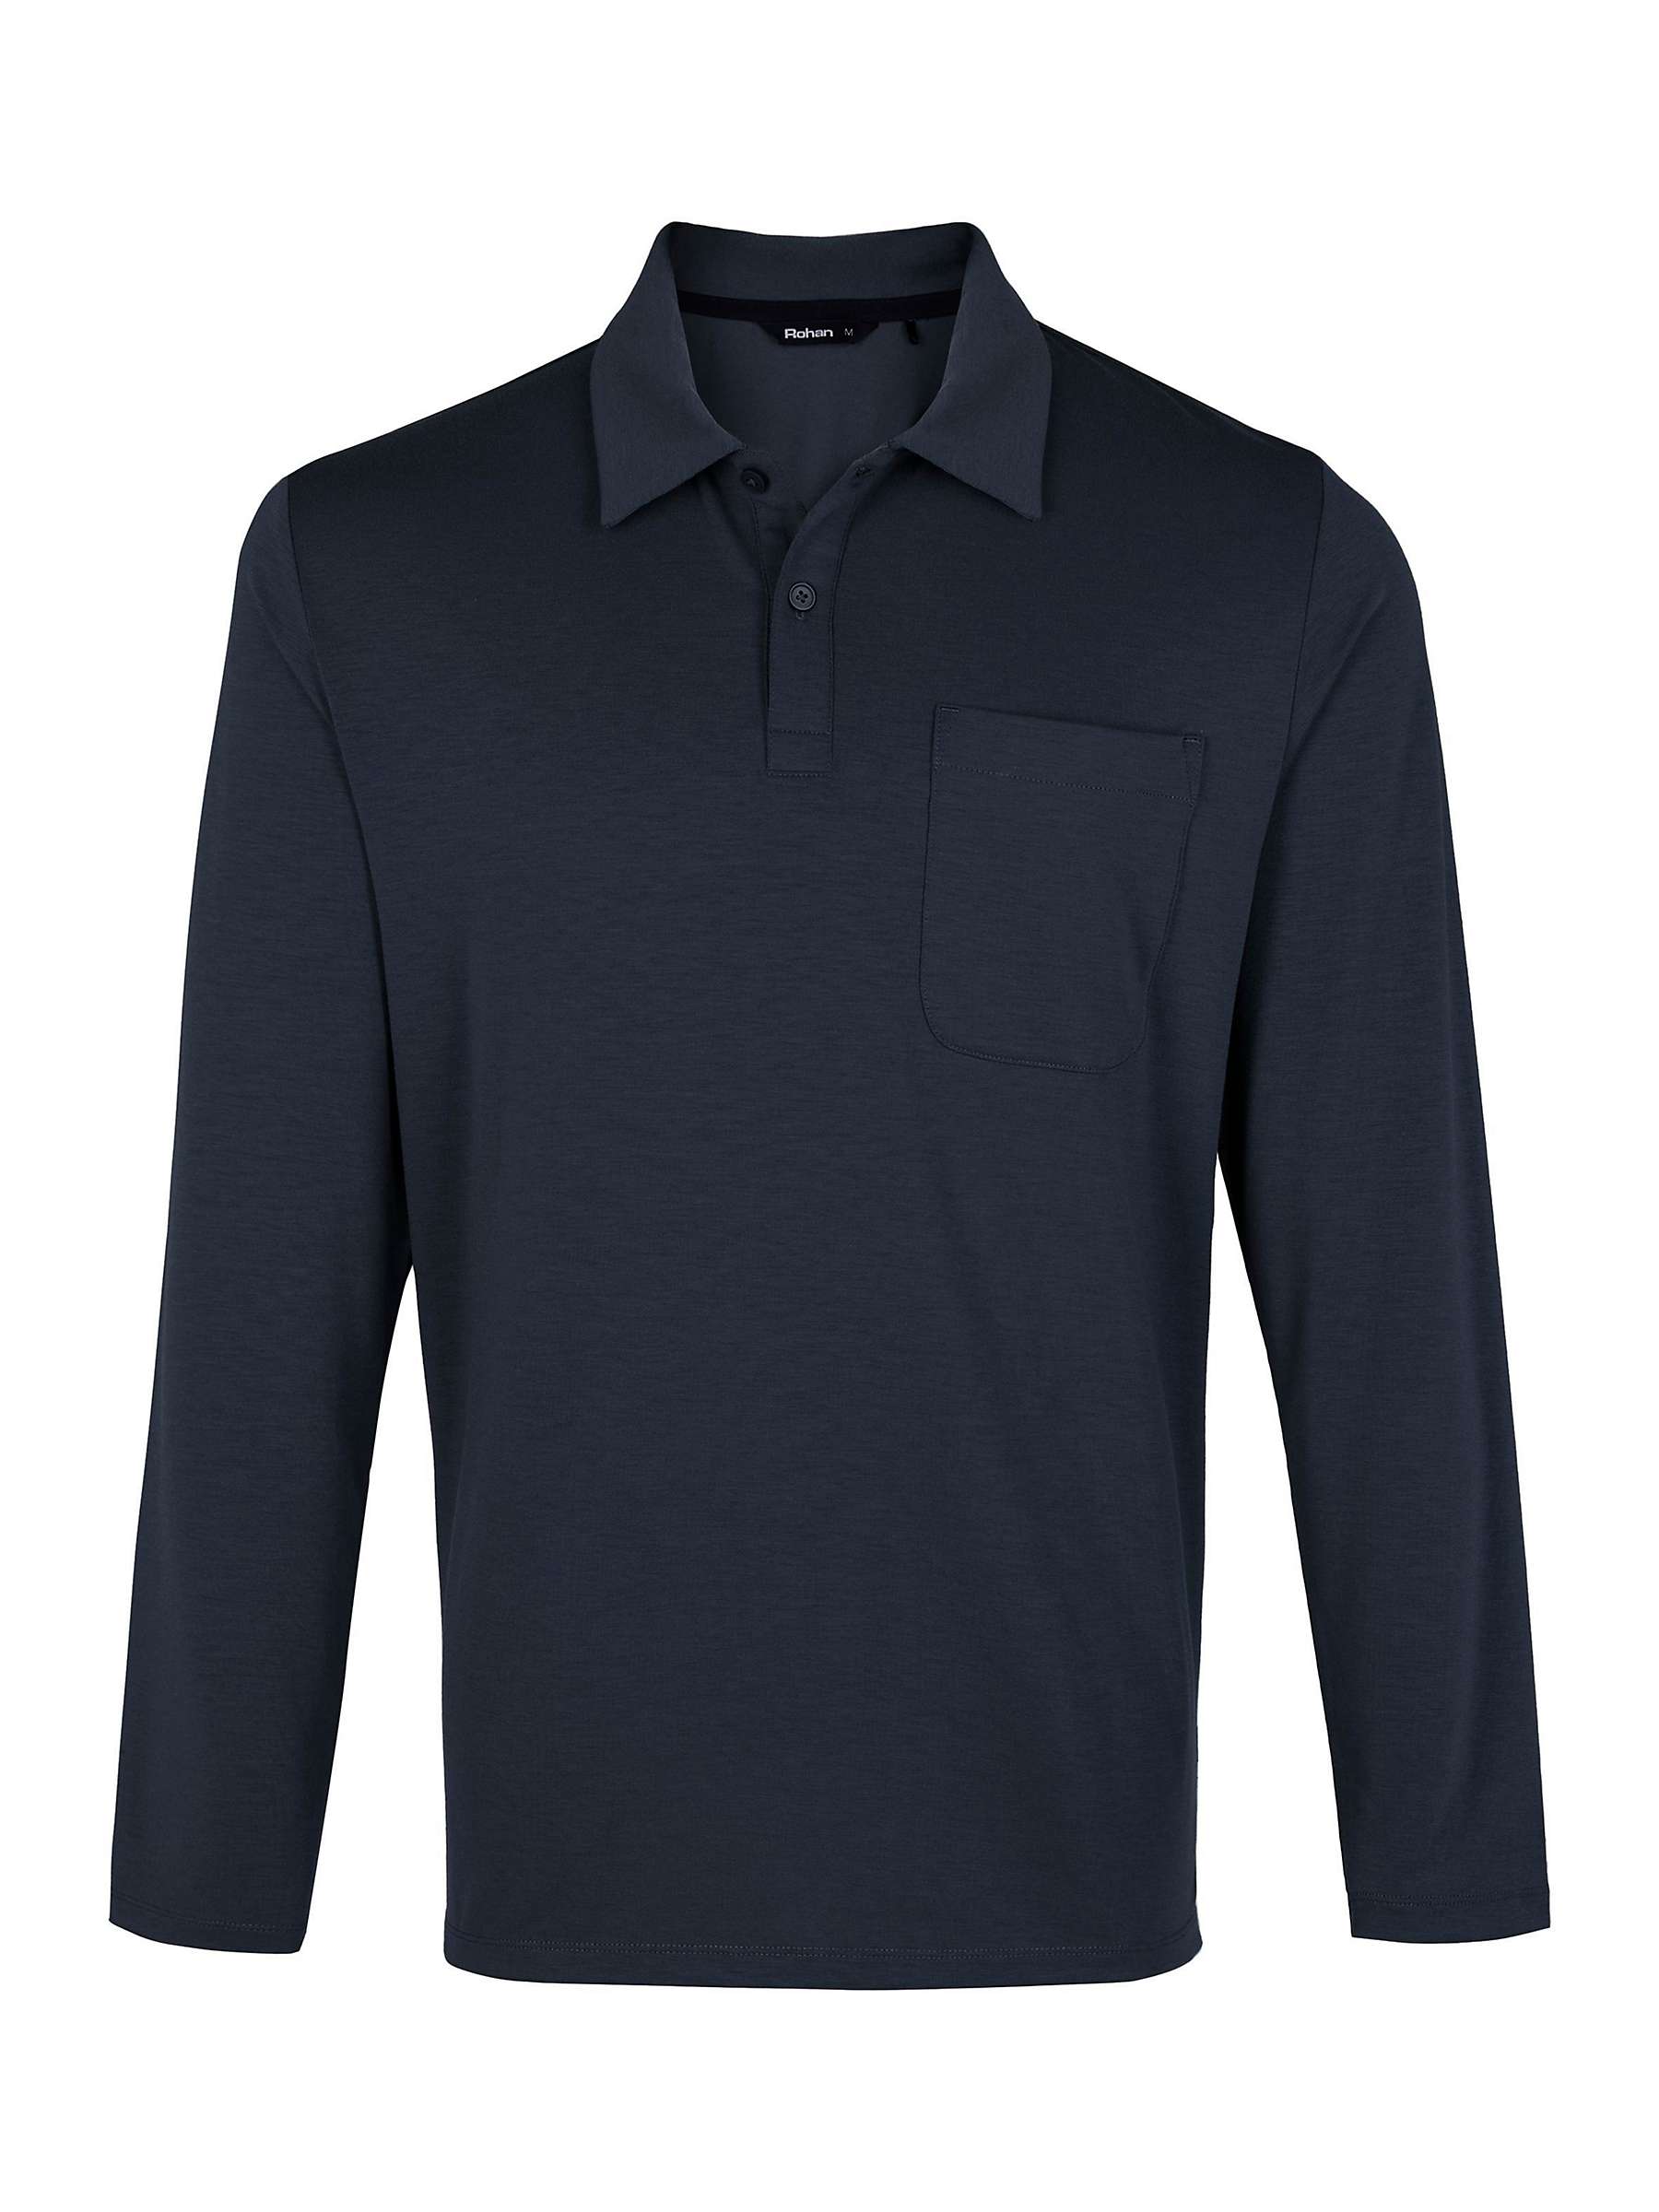 Buy Rohan Global Long Sleeve Polo Top Online at johnlewis.com